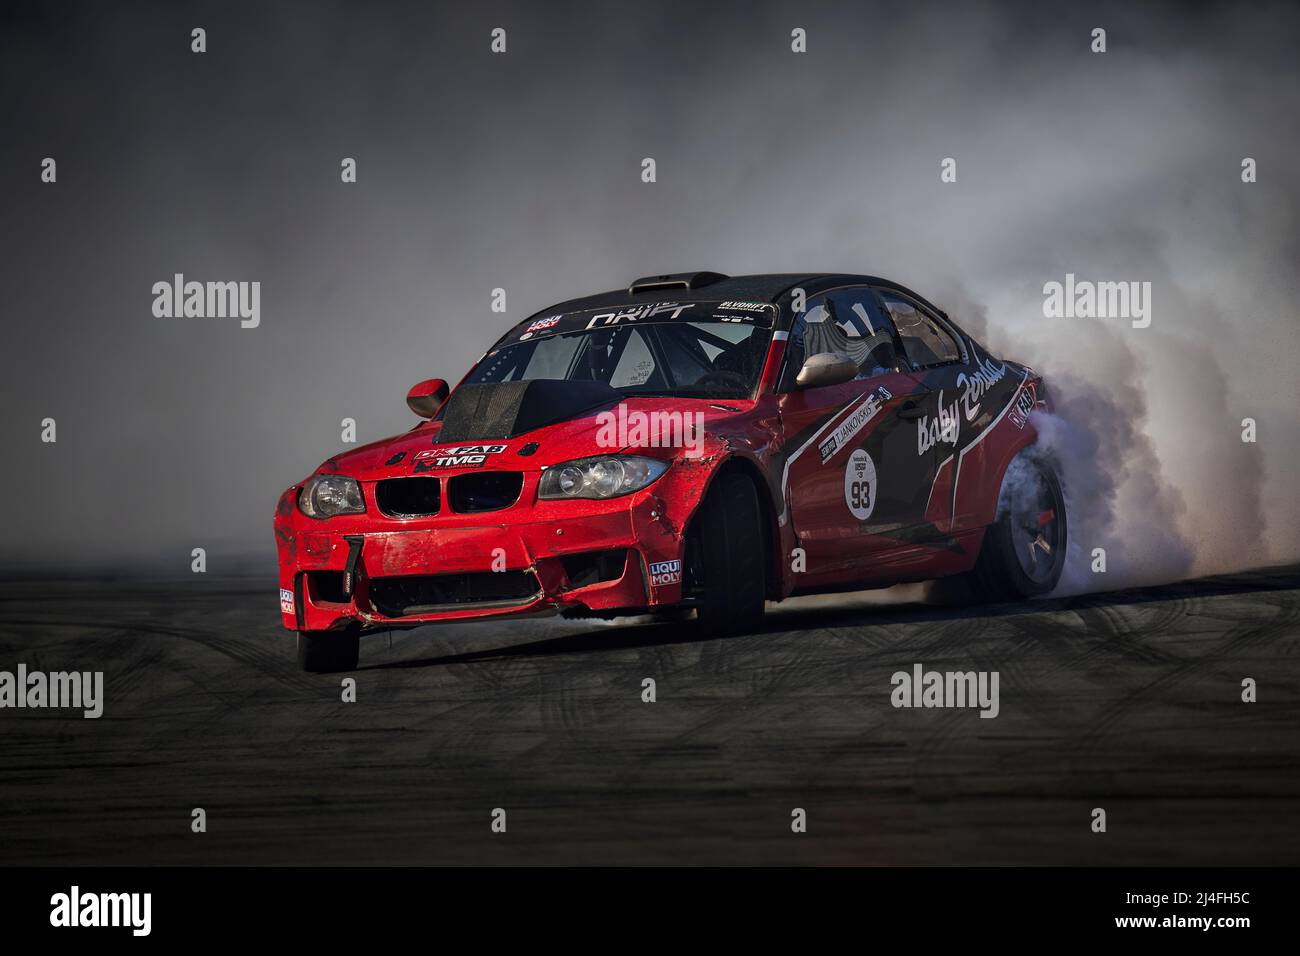 Car drifting image diffusion race drift car with lots of smoke from burning  tires on speed track Stock Illustration, drift car